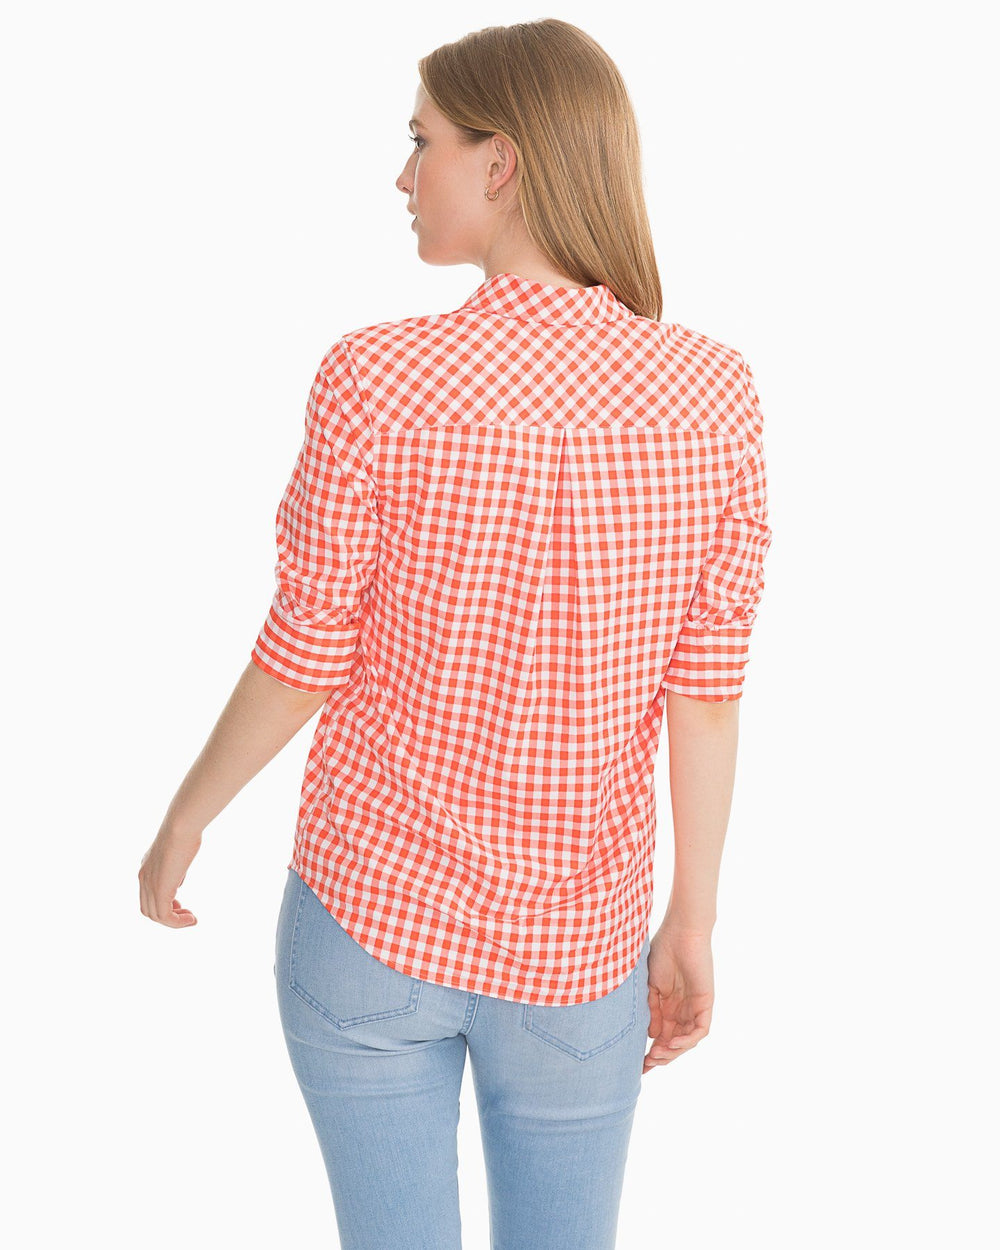 The back view of the Southern Tide Gameday Intercoastal Hadley Popover by Southern Tide - Endzone Orange